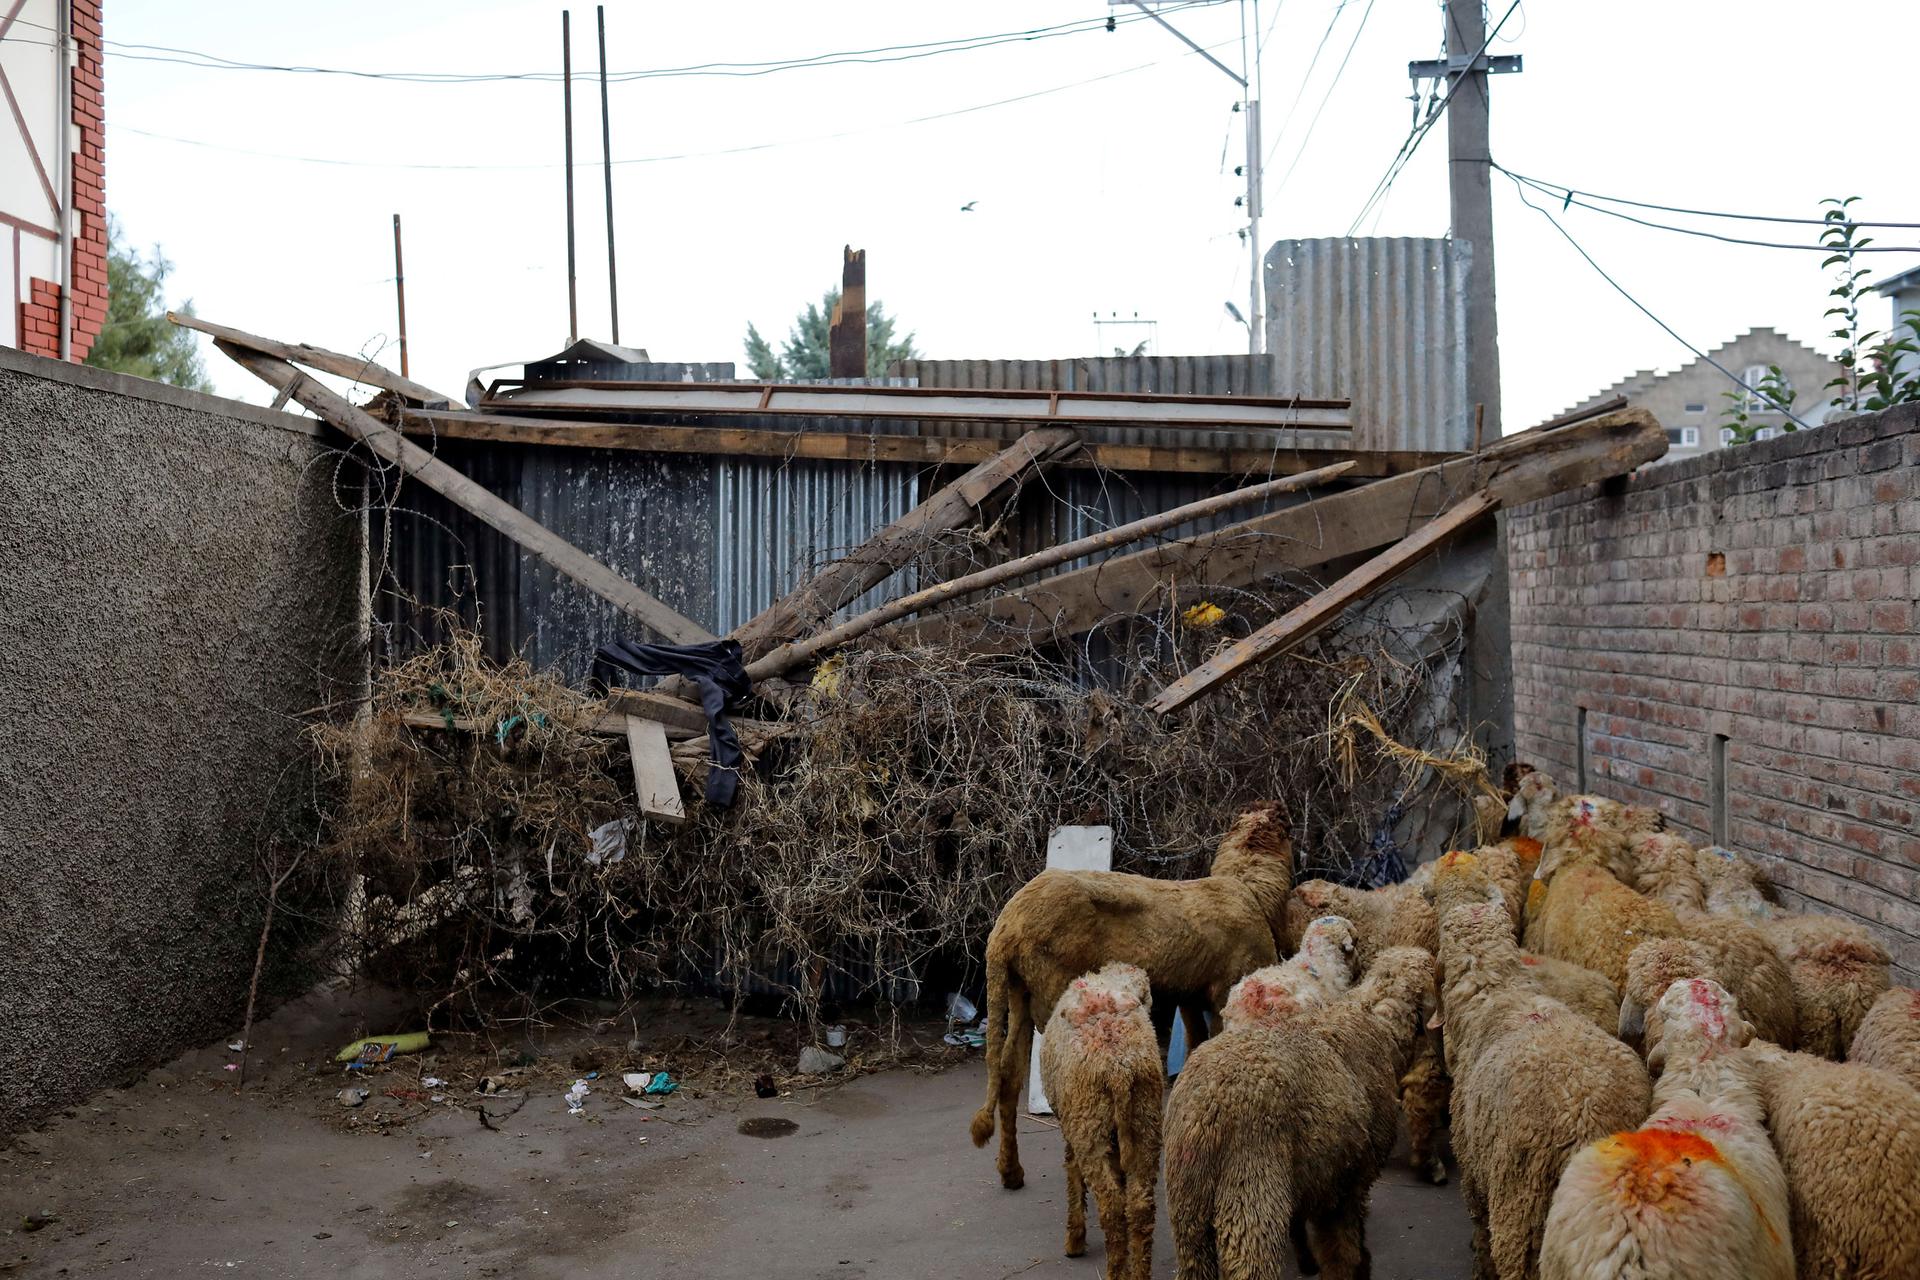 A herd of brown sheep are shown standing at wooden barricade.